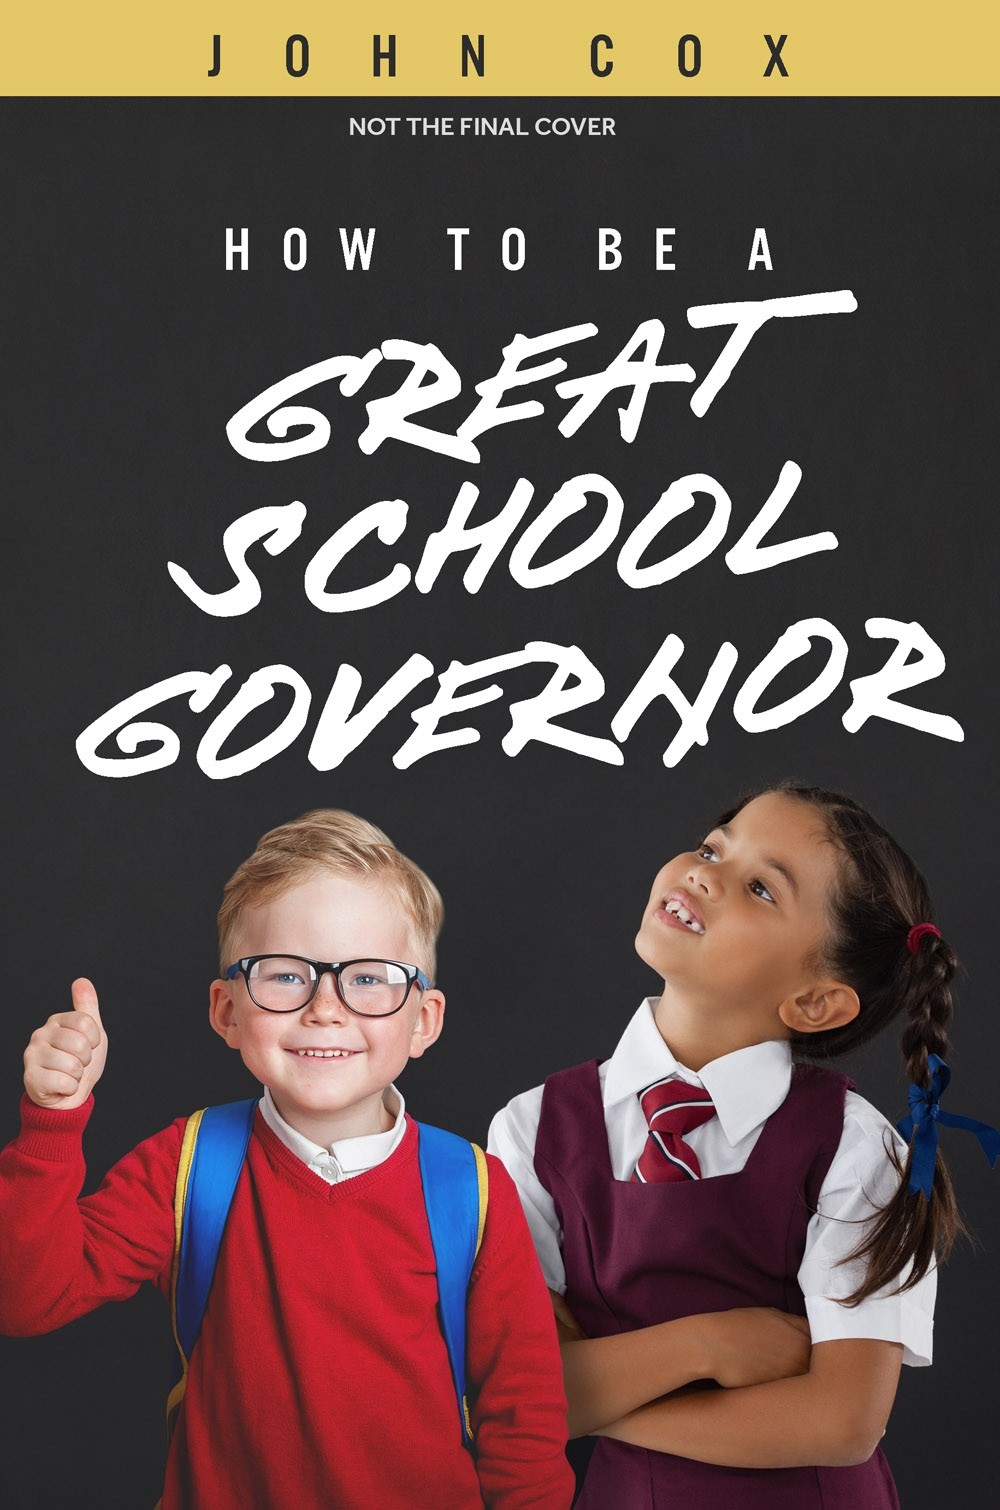 How To Be A Great School Governor By John Cox (Paperback)